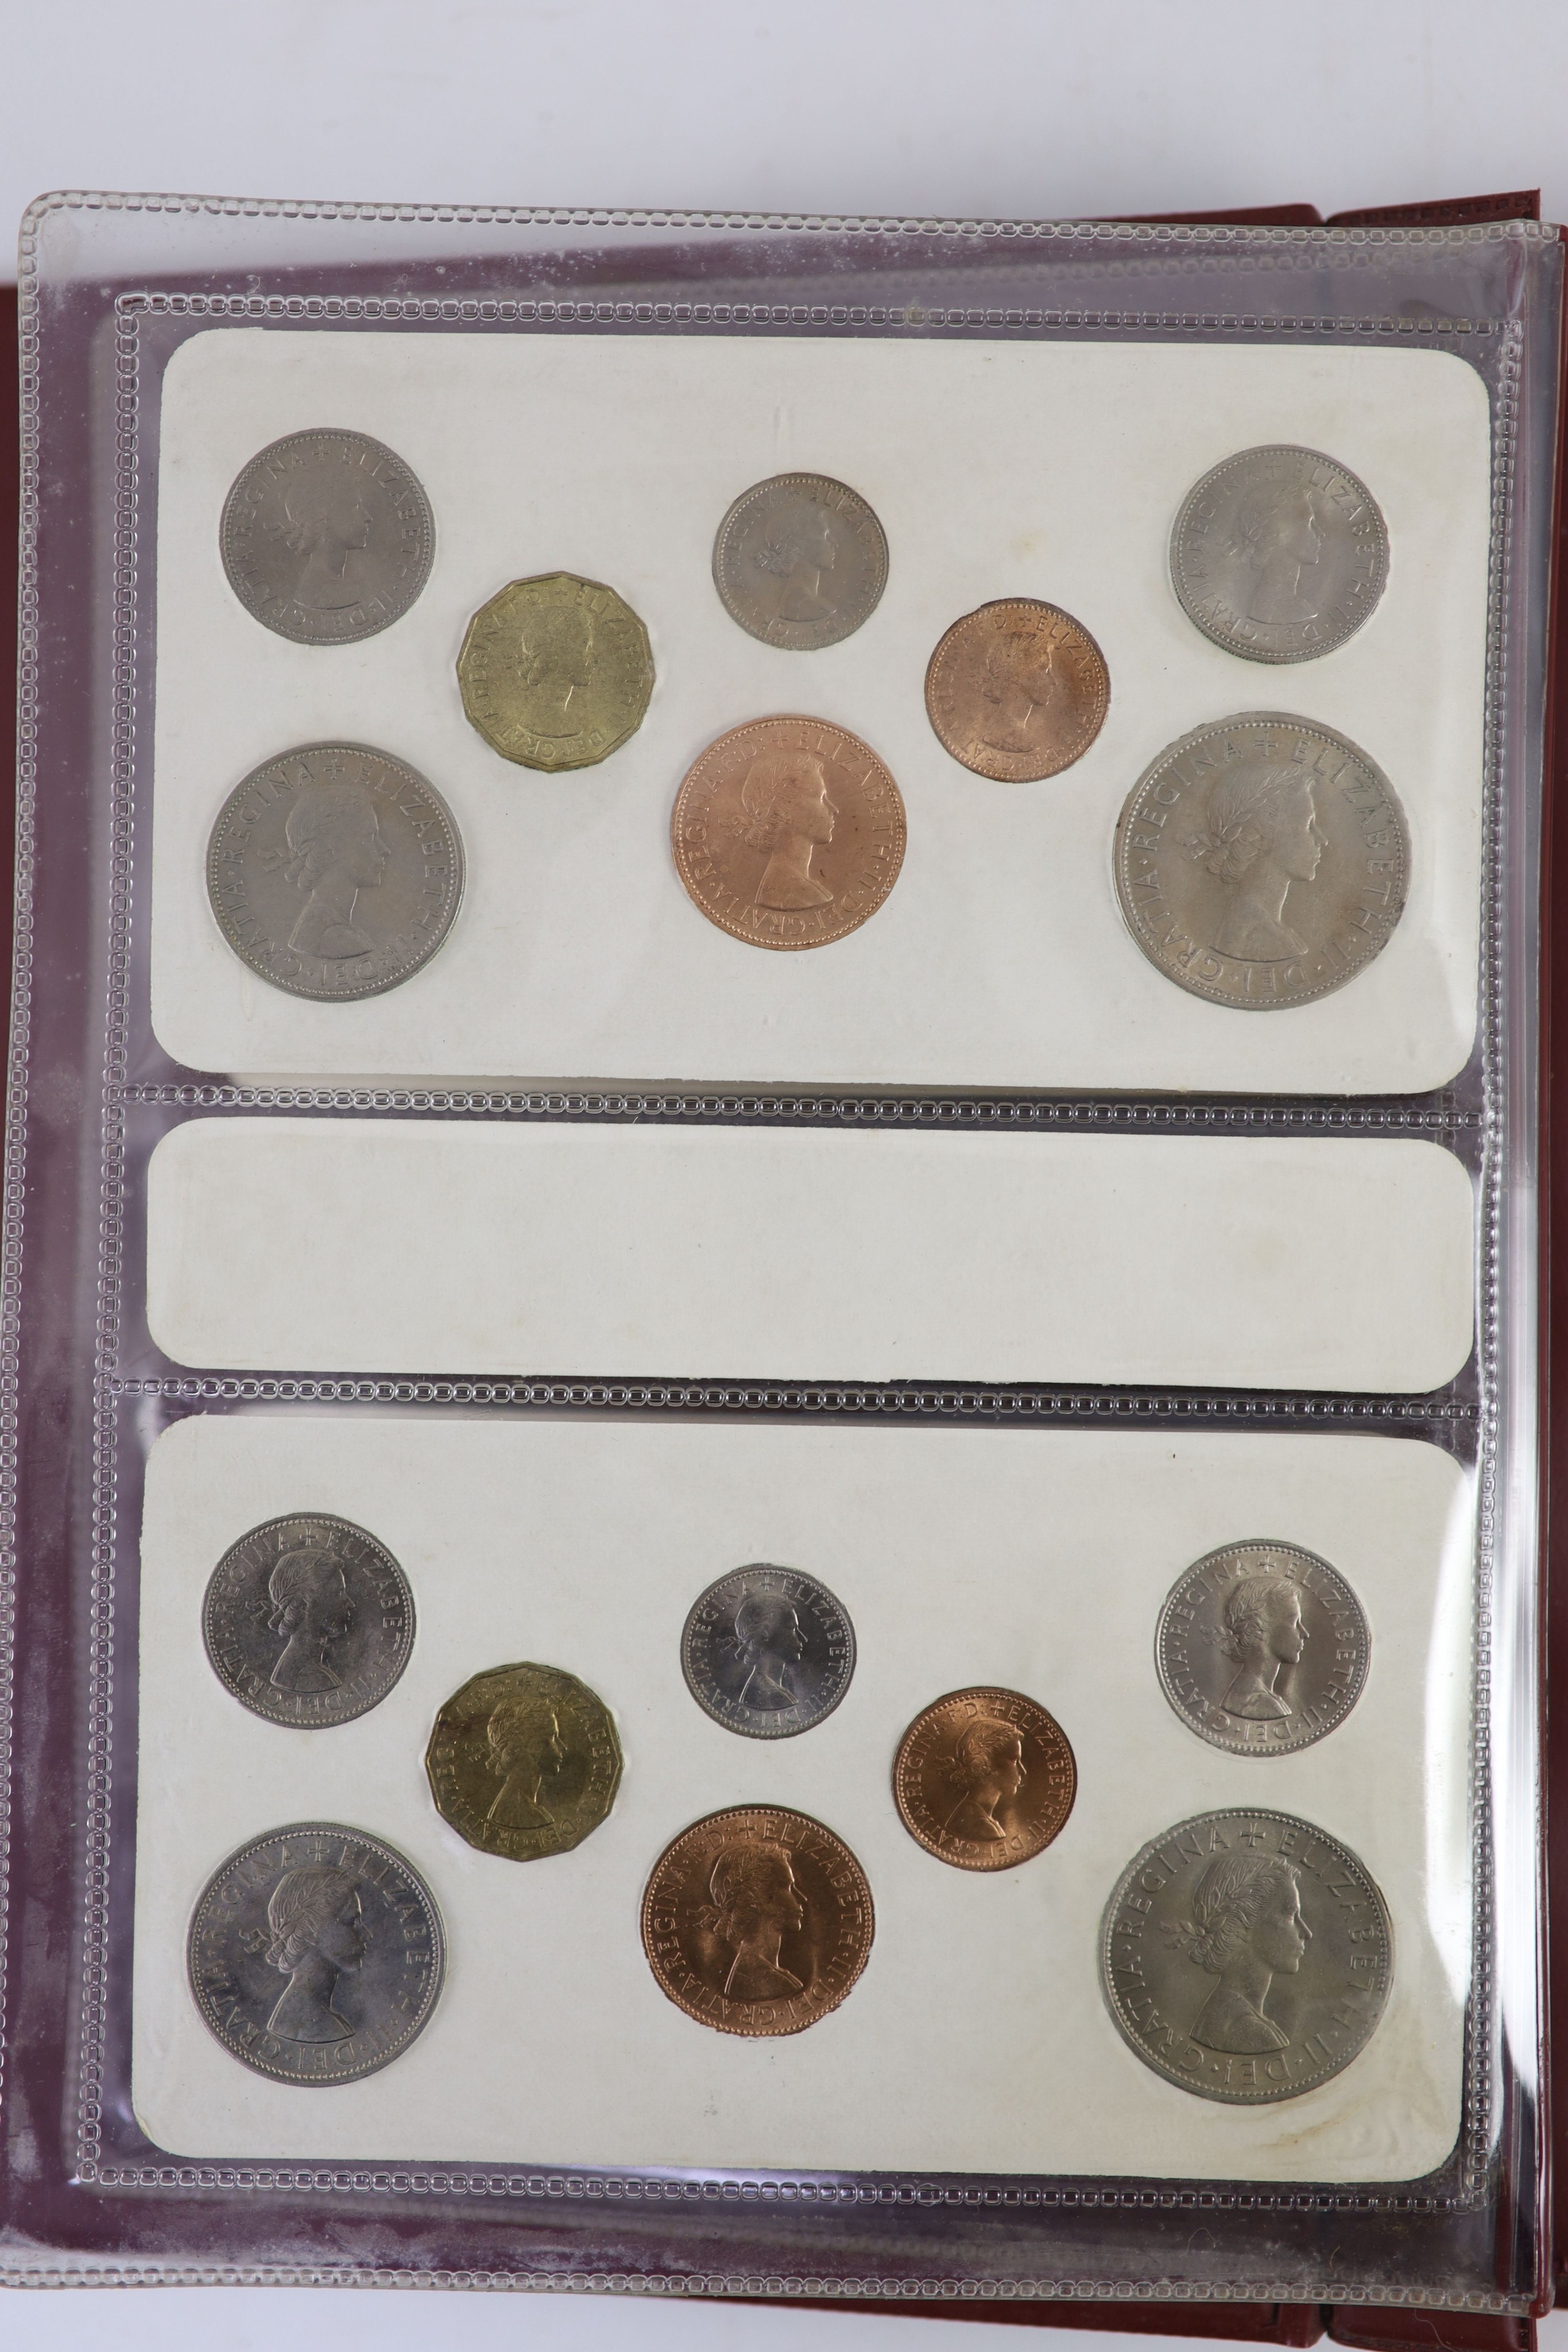 Queen Elizabeth II pre-decimal specimen coin sets for 1953 - 1967, first and second issues, all EF/ - Image 9 of 34